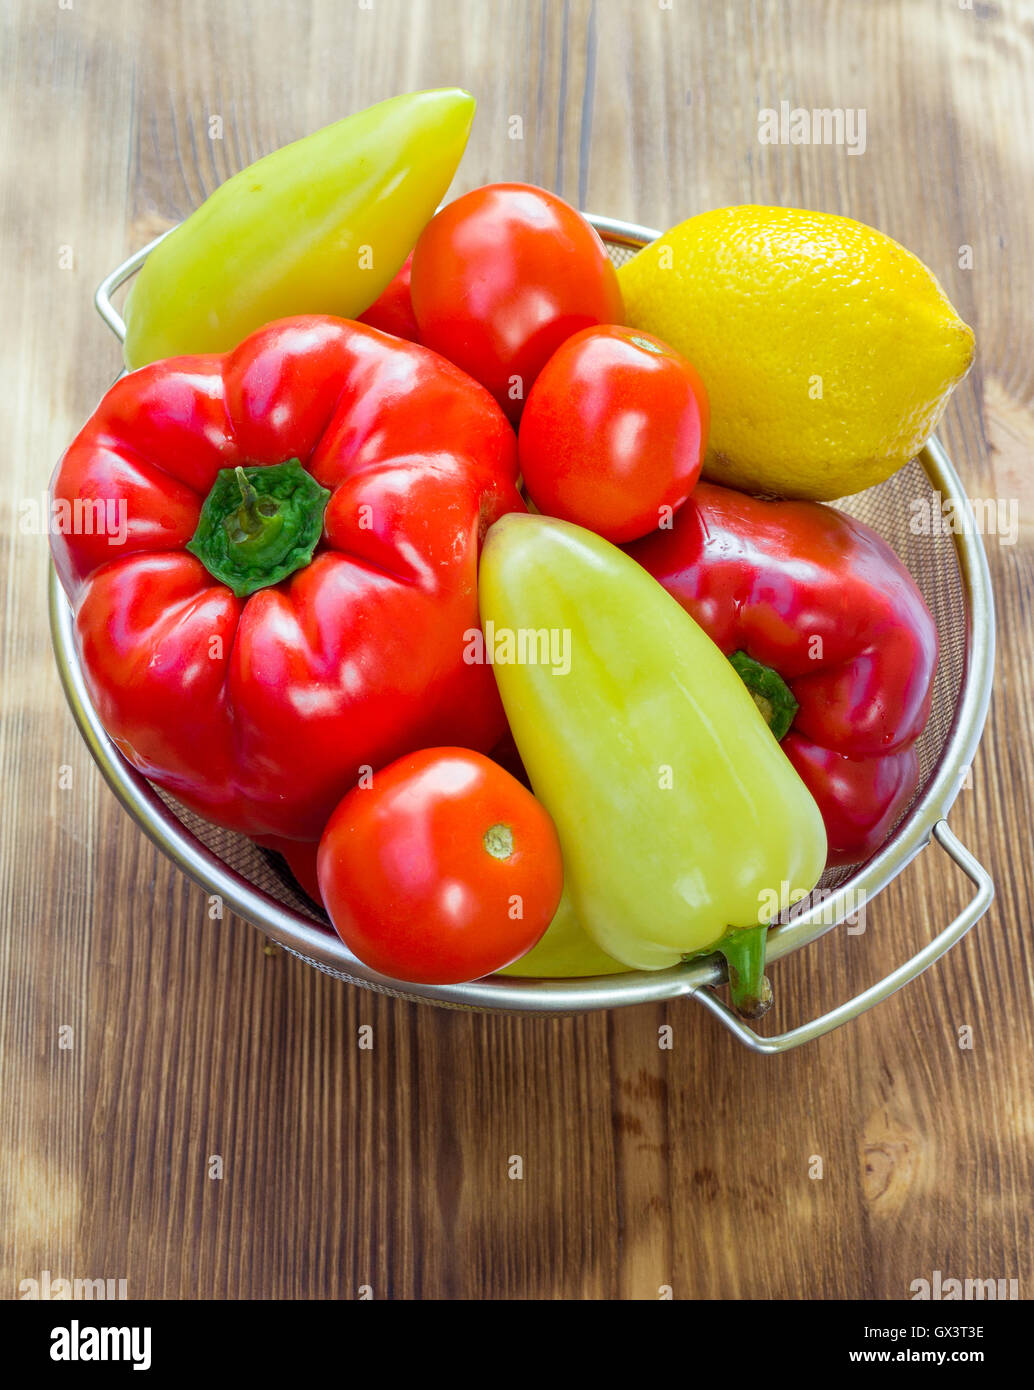 Vegetable still life of red and green peppers, tomatoes and lemon in sieve bowl on wooden board background Stock Photo